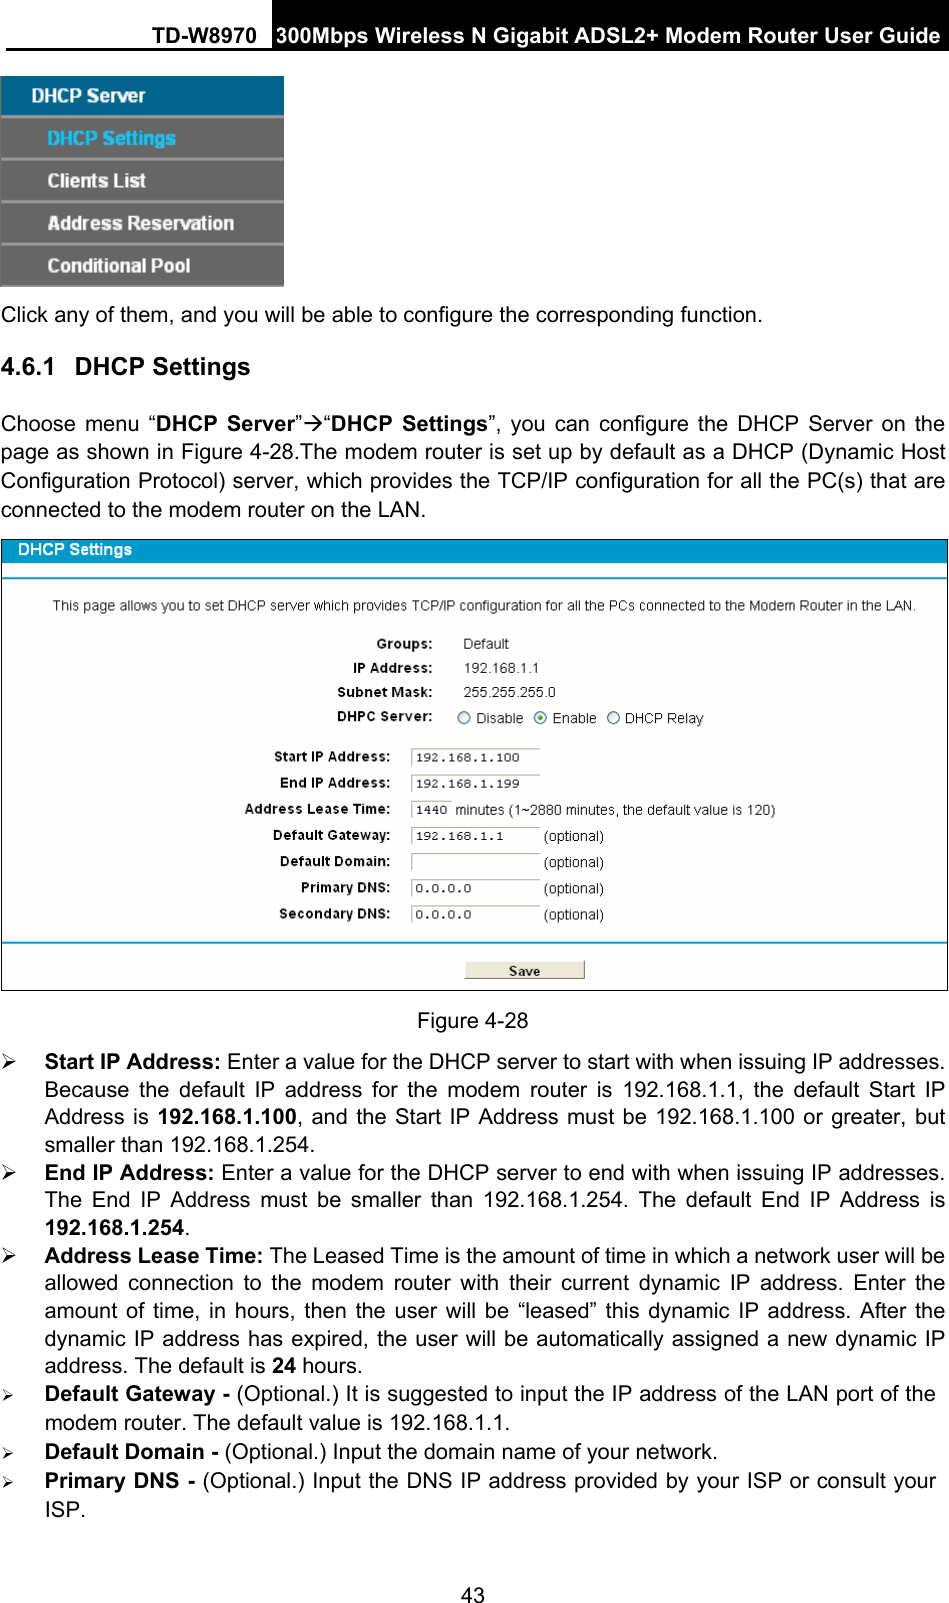 TD-W8970 300Mbps Wireless N Gigabit ADSL2+ Modem Router User Guide 43  Click any of them, and you will be able to configure the corresponding function. 4.6.1  DHCP Settings Choose menu “DHCP Server”Æ“DHCP Settings”, you can configure the DHCP Server on the page as shown in Figure 4-28.The modem router is set up by default as a DHCP (Dynamic Host Configuration Protocol) server, which provides the TCP/IP configuration for all the PC(s) that are connected to the modem router on the LAN.  Figure 4-28 ¾ Start IP Address: Enter a value for the DHCP server to start with when issuing IP addresses. Because the default IP address for the modem router is 192.168.1.1, the default Start IP Address is 192.168.1.100, and the Start IP Address must be 192.168.1.100 or greater, but smaller than 192.168.1.254. ¾ End IP Address: Enter a value for the DHCP server to end with when issuing IP addresses. The End IP Address must be smaller than 192.168.1.254. The default End IP Address is 192.168.1.254. ¾ Address Lease Time: The Leased Time is the amount of time in which a network user will be allowed connection to the modem router with their current dynamic IP address. Enter the amount of time, in hours, then the user will be “leased” this dynamic IP address. After the dynamic IP address has expired, the user will be automatically assigned a new dynamic IP address. The default is 24 hours. ¾ Default Gateway - (Optional.) It is suggested to input the IP address of the LAN port of the modem router. The default value is 192.168.1.1. ¾ Default Domain - (Optional.) Input the domain name of your network. ¾ Primary DNS - (Optional.) Input the DNS IP address provided by your ISP or consult your ISP. 